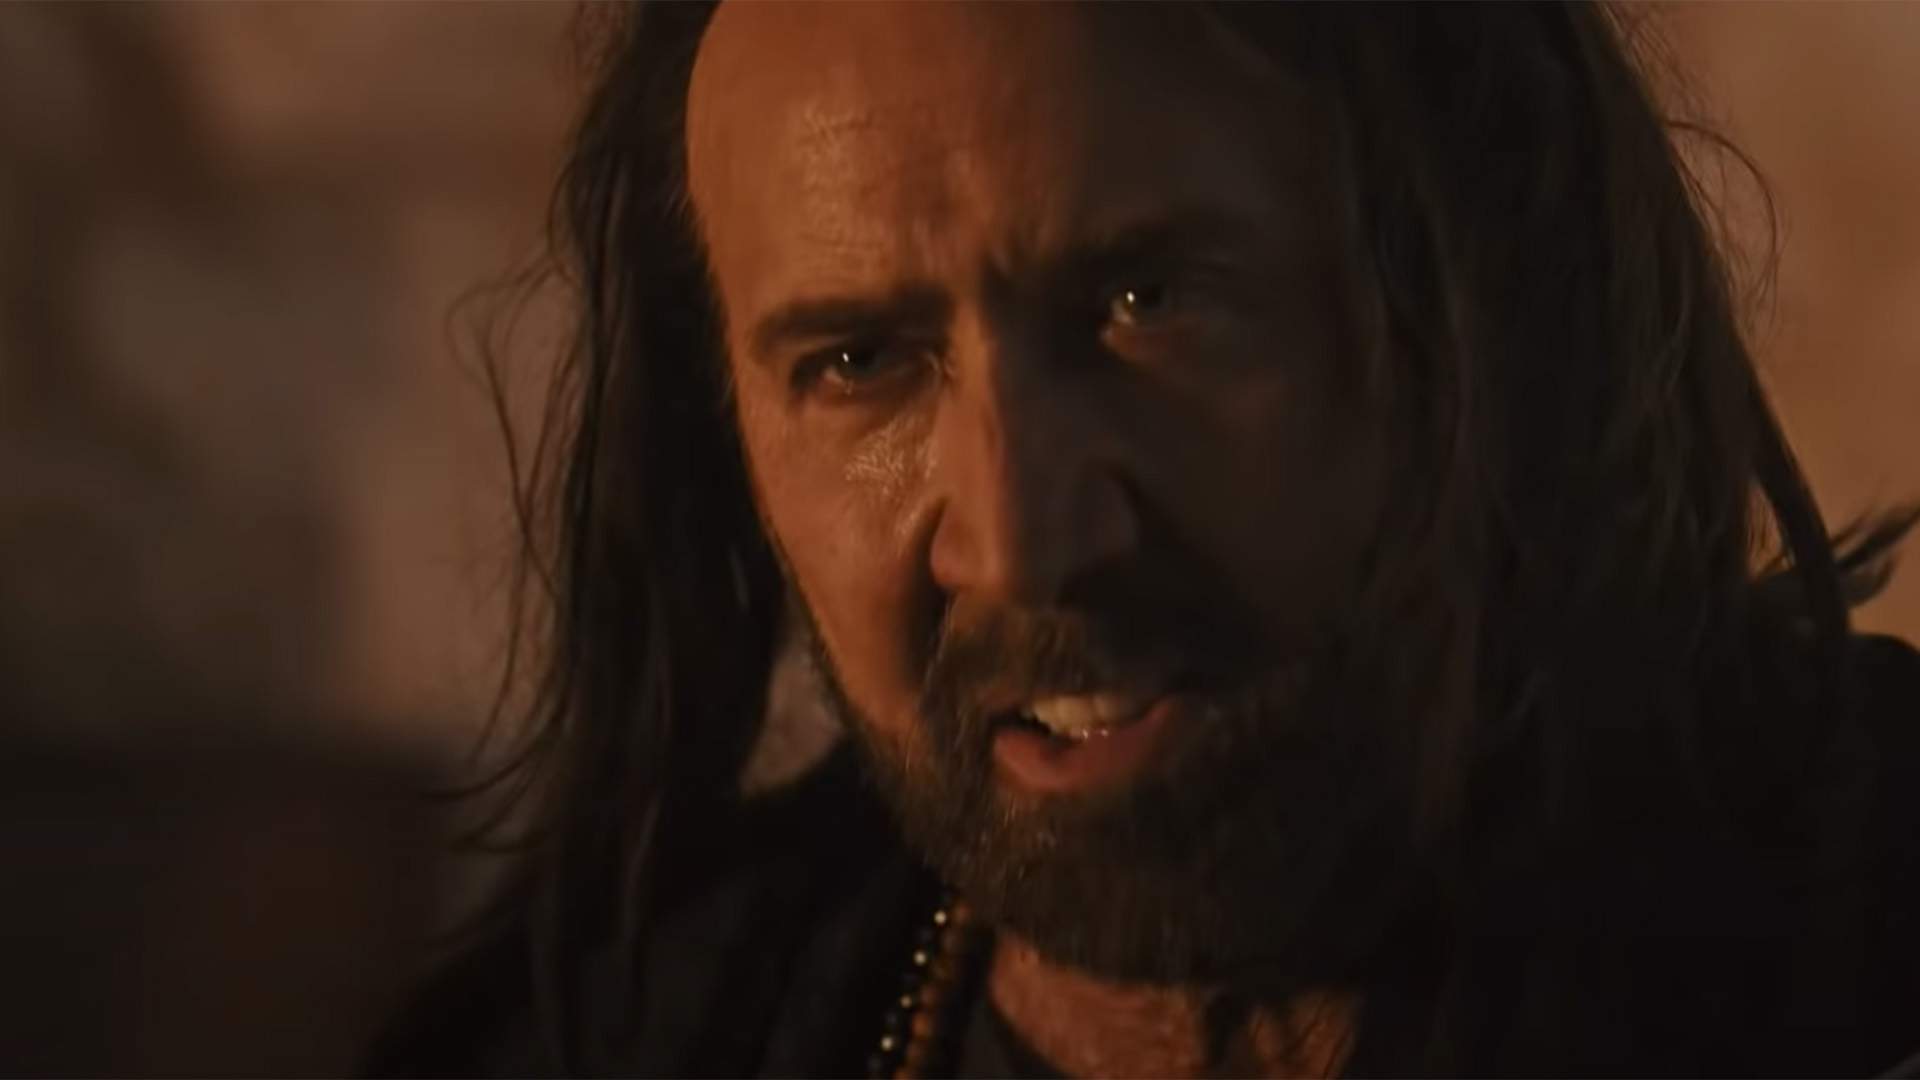 Nicolas Cage Fights Ninjas From Space in the Trailer for OTT New Action Movie 'Jiu Jitsu'